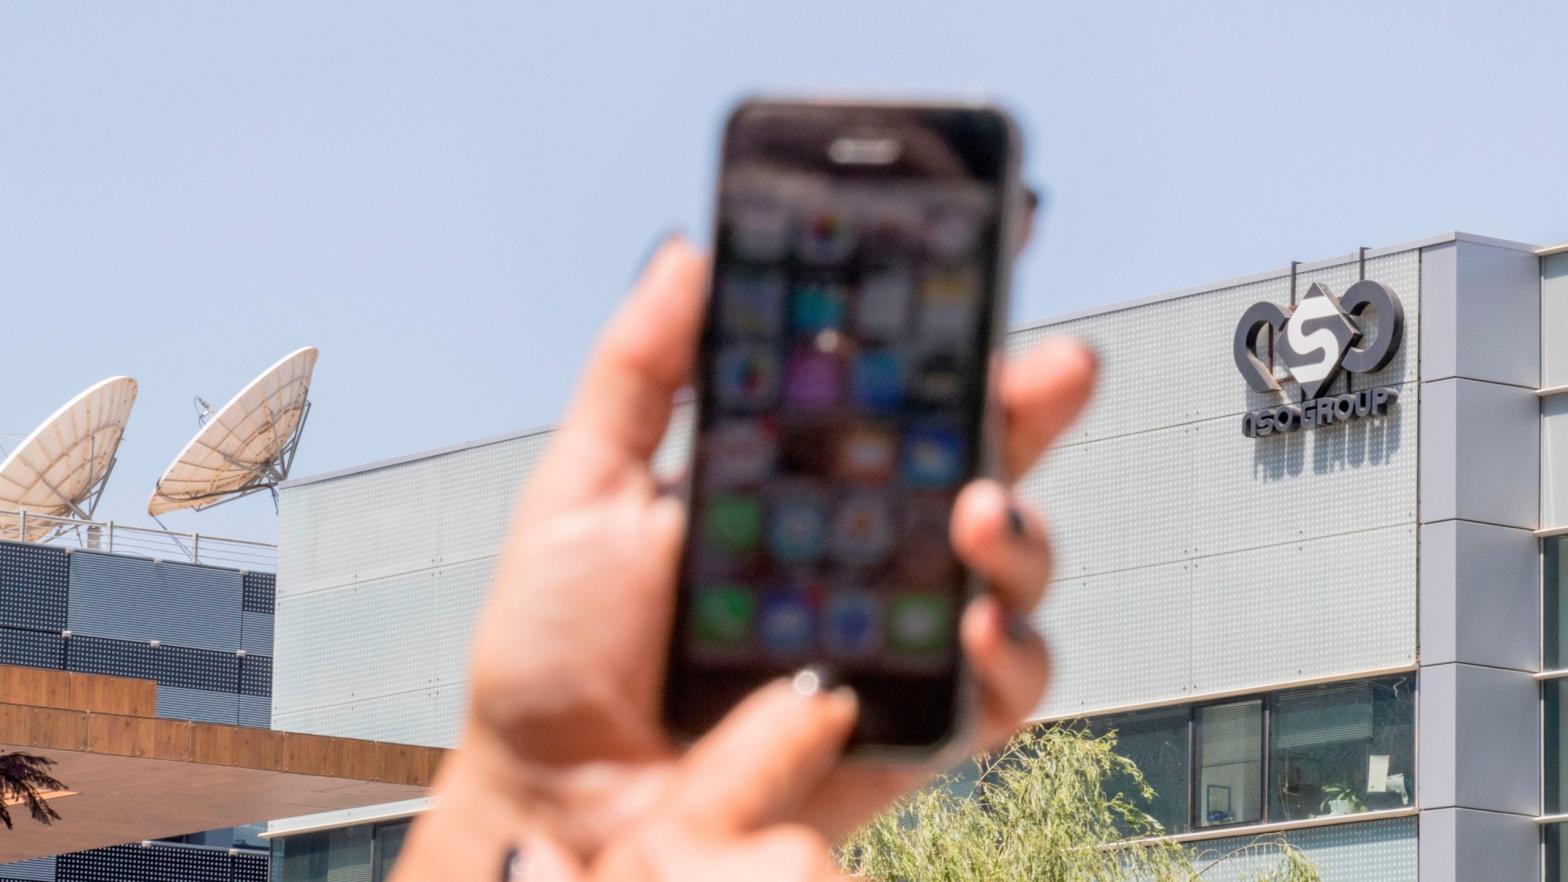 An Israeli woman uses her iPhone in front of the building housing the Israeli NSO group, on August 28, 2016, in Herzliya, near Tel Aviv.  (Photo: Jack Guez / AFP, Getty Images)